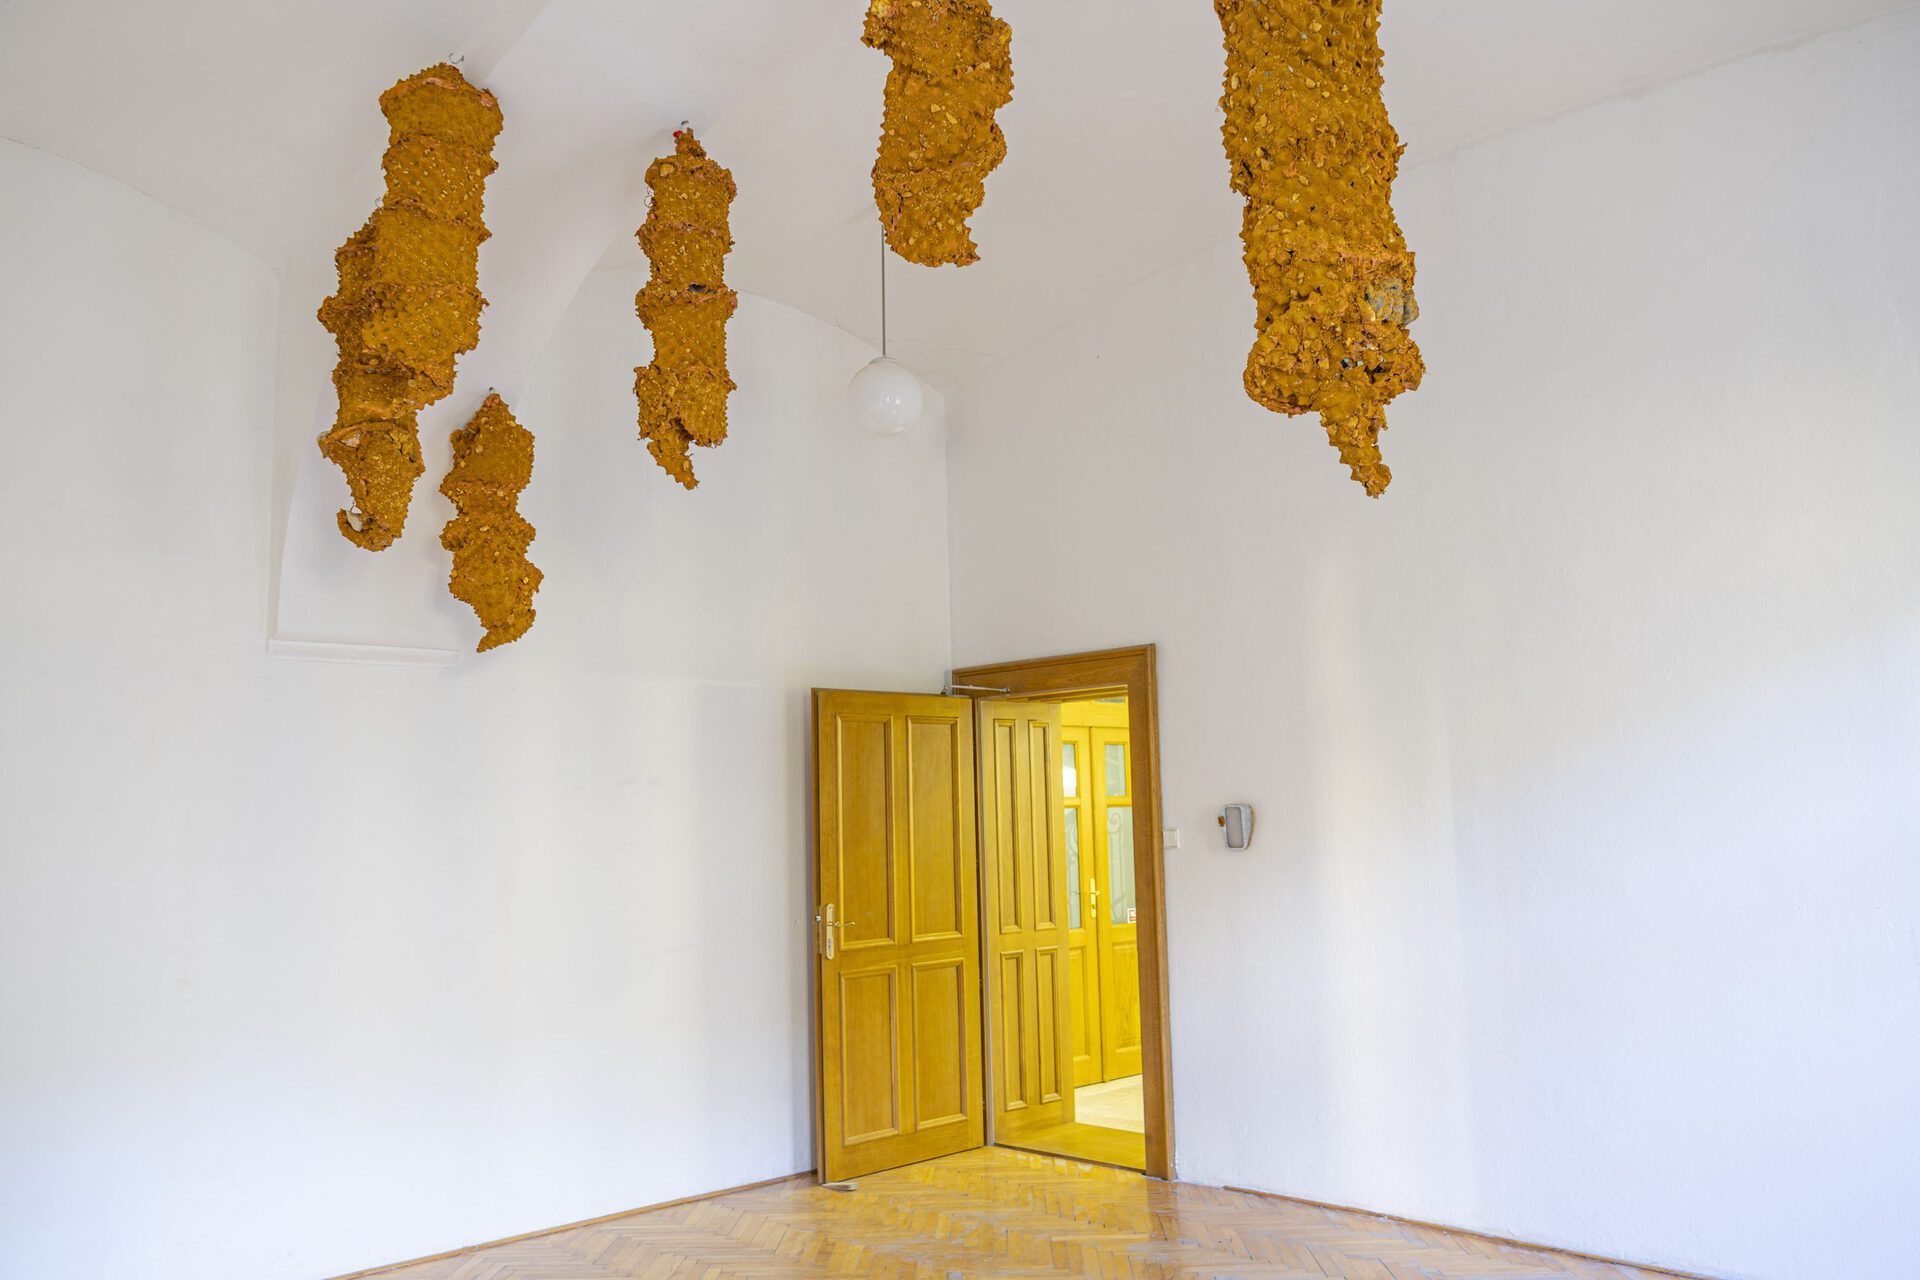 Šimon Chovan, Dear Thearlings, 2018 - ongoing,  silicone, soil, dust, rocks, plaster, fabric, variable dimensions